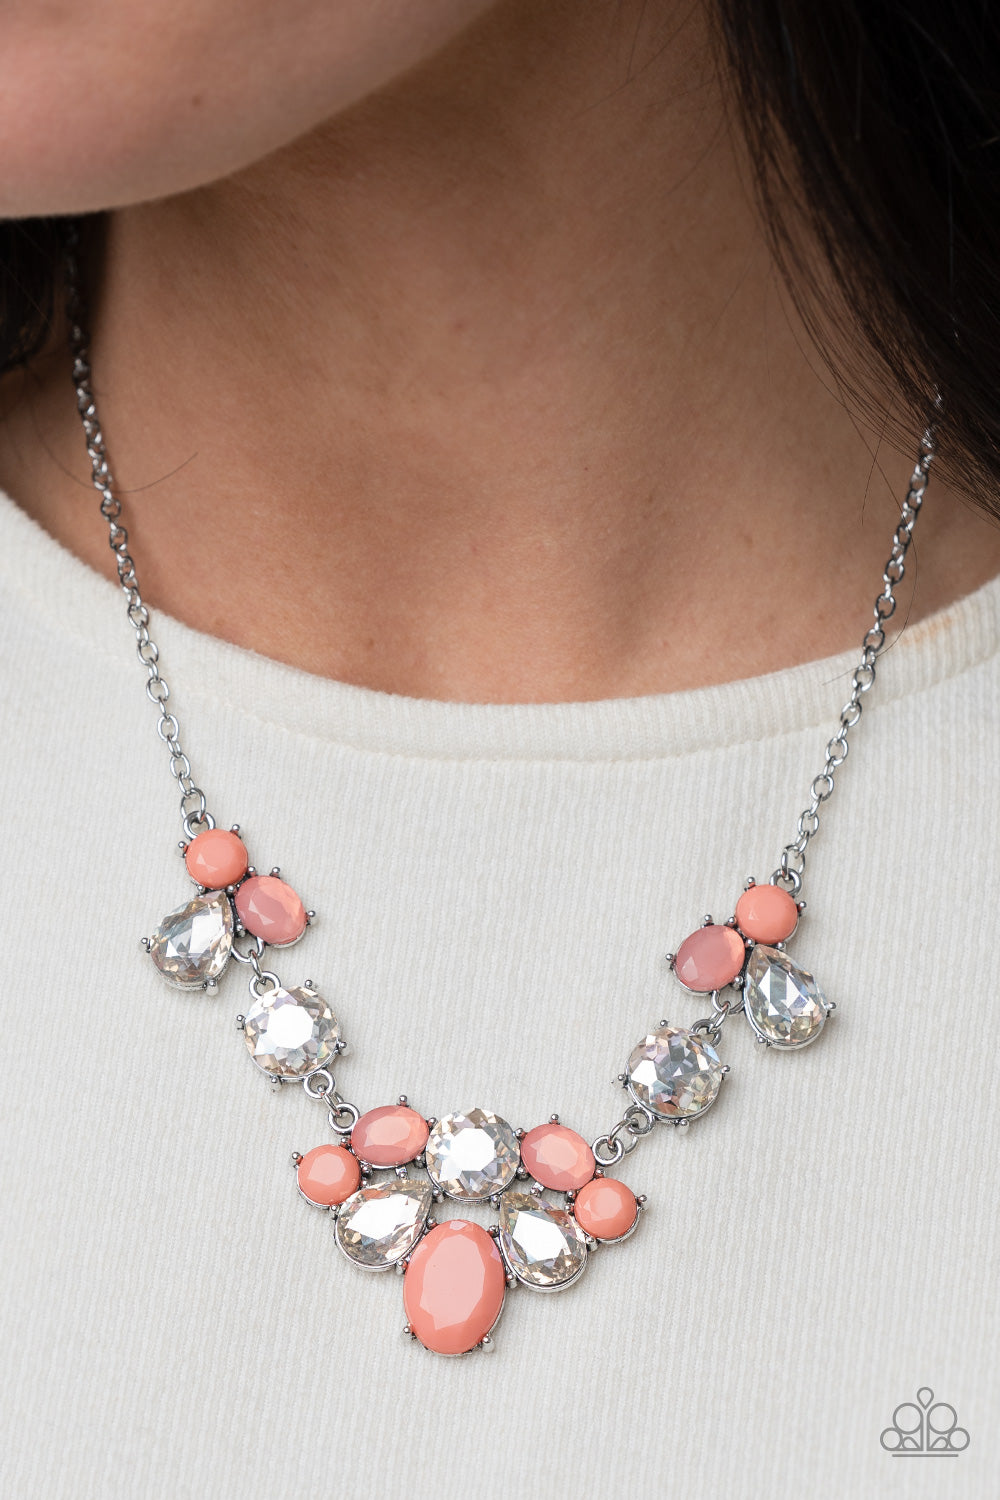 Ethereal Romance- Orange and Silver Necklace- Paparazzi Accessories